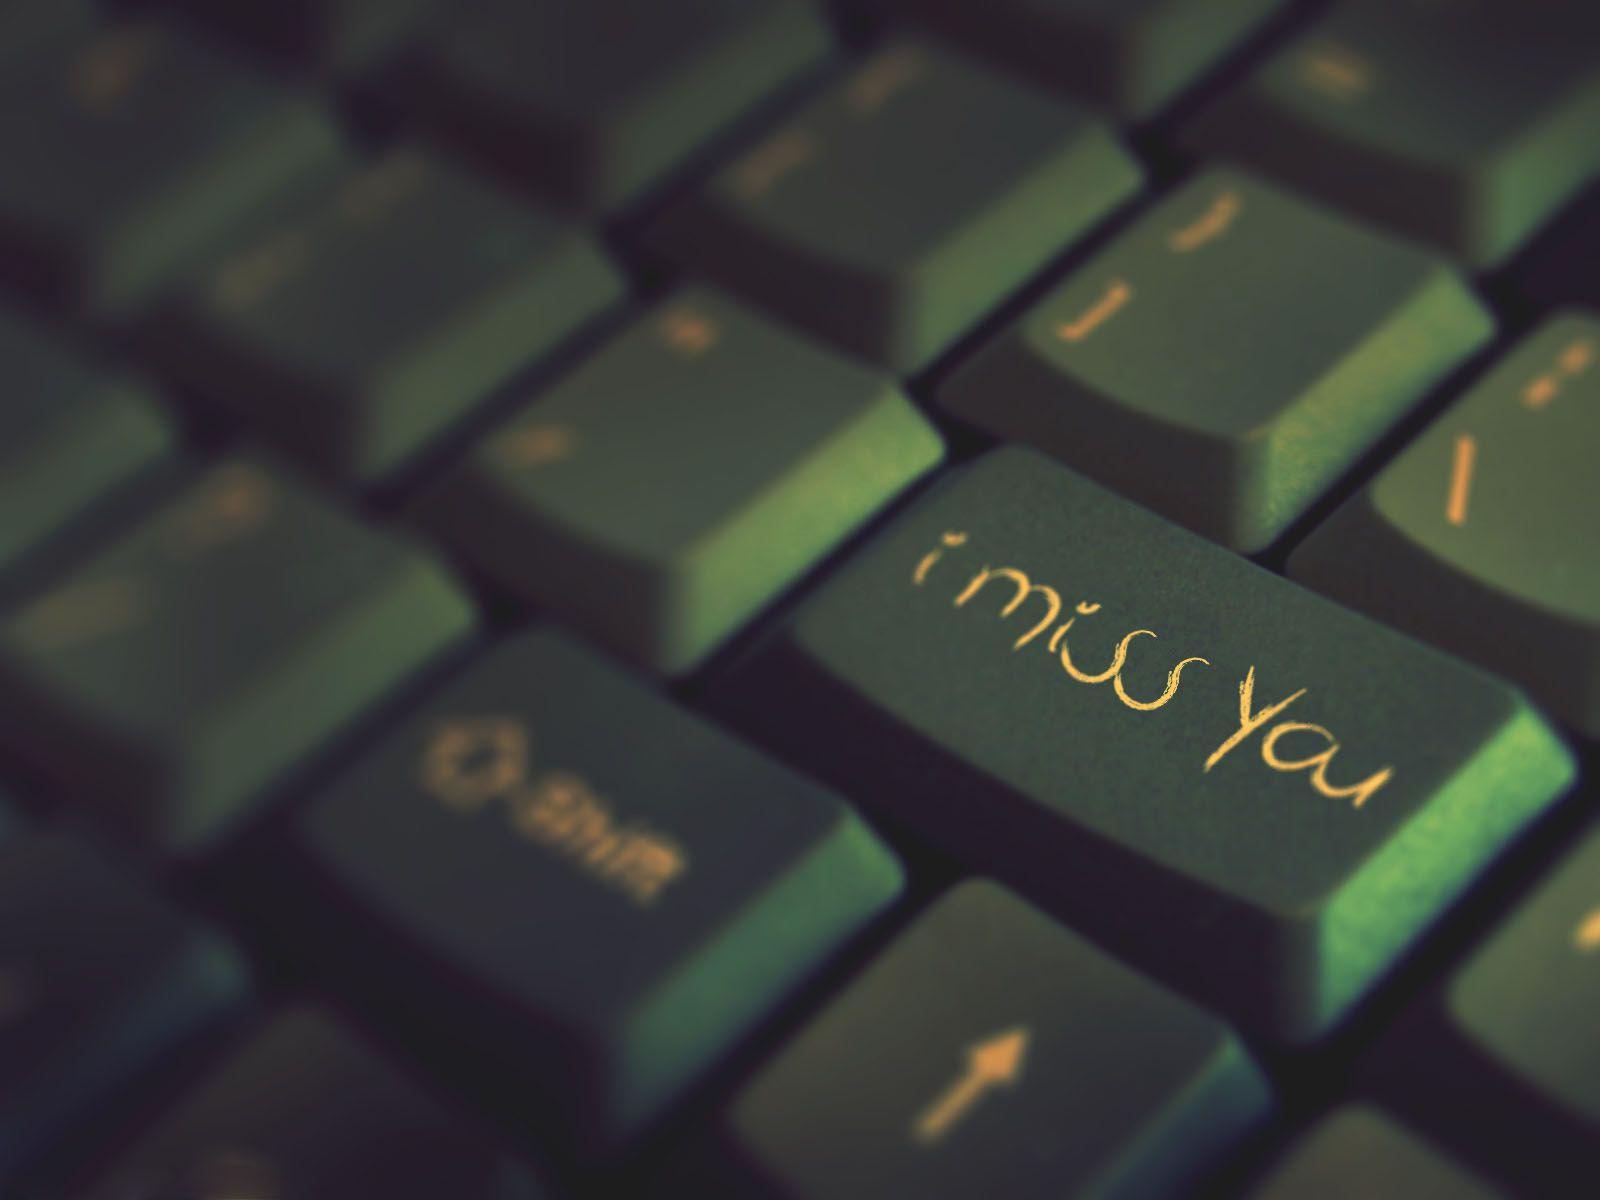 I Miss U wallpaper collection for lovers- Love pics. wallpaper